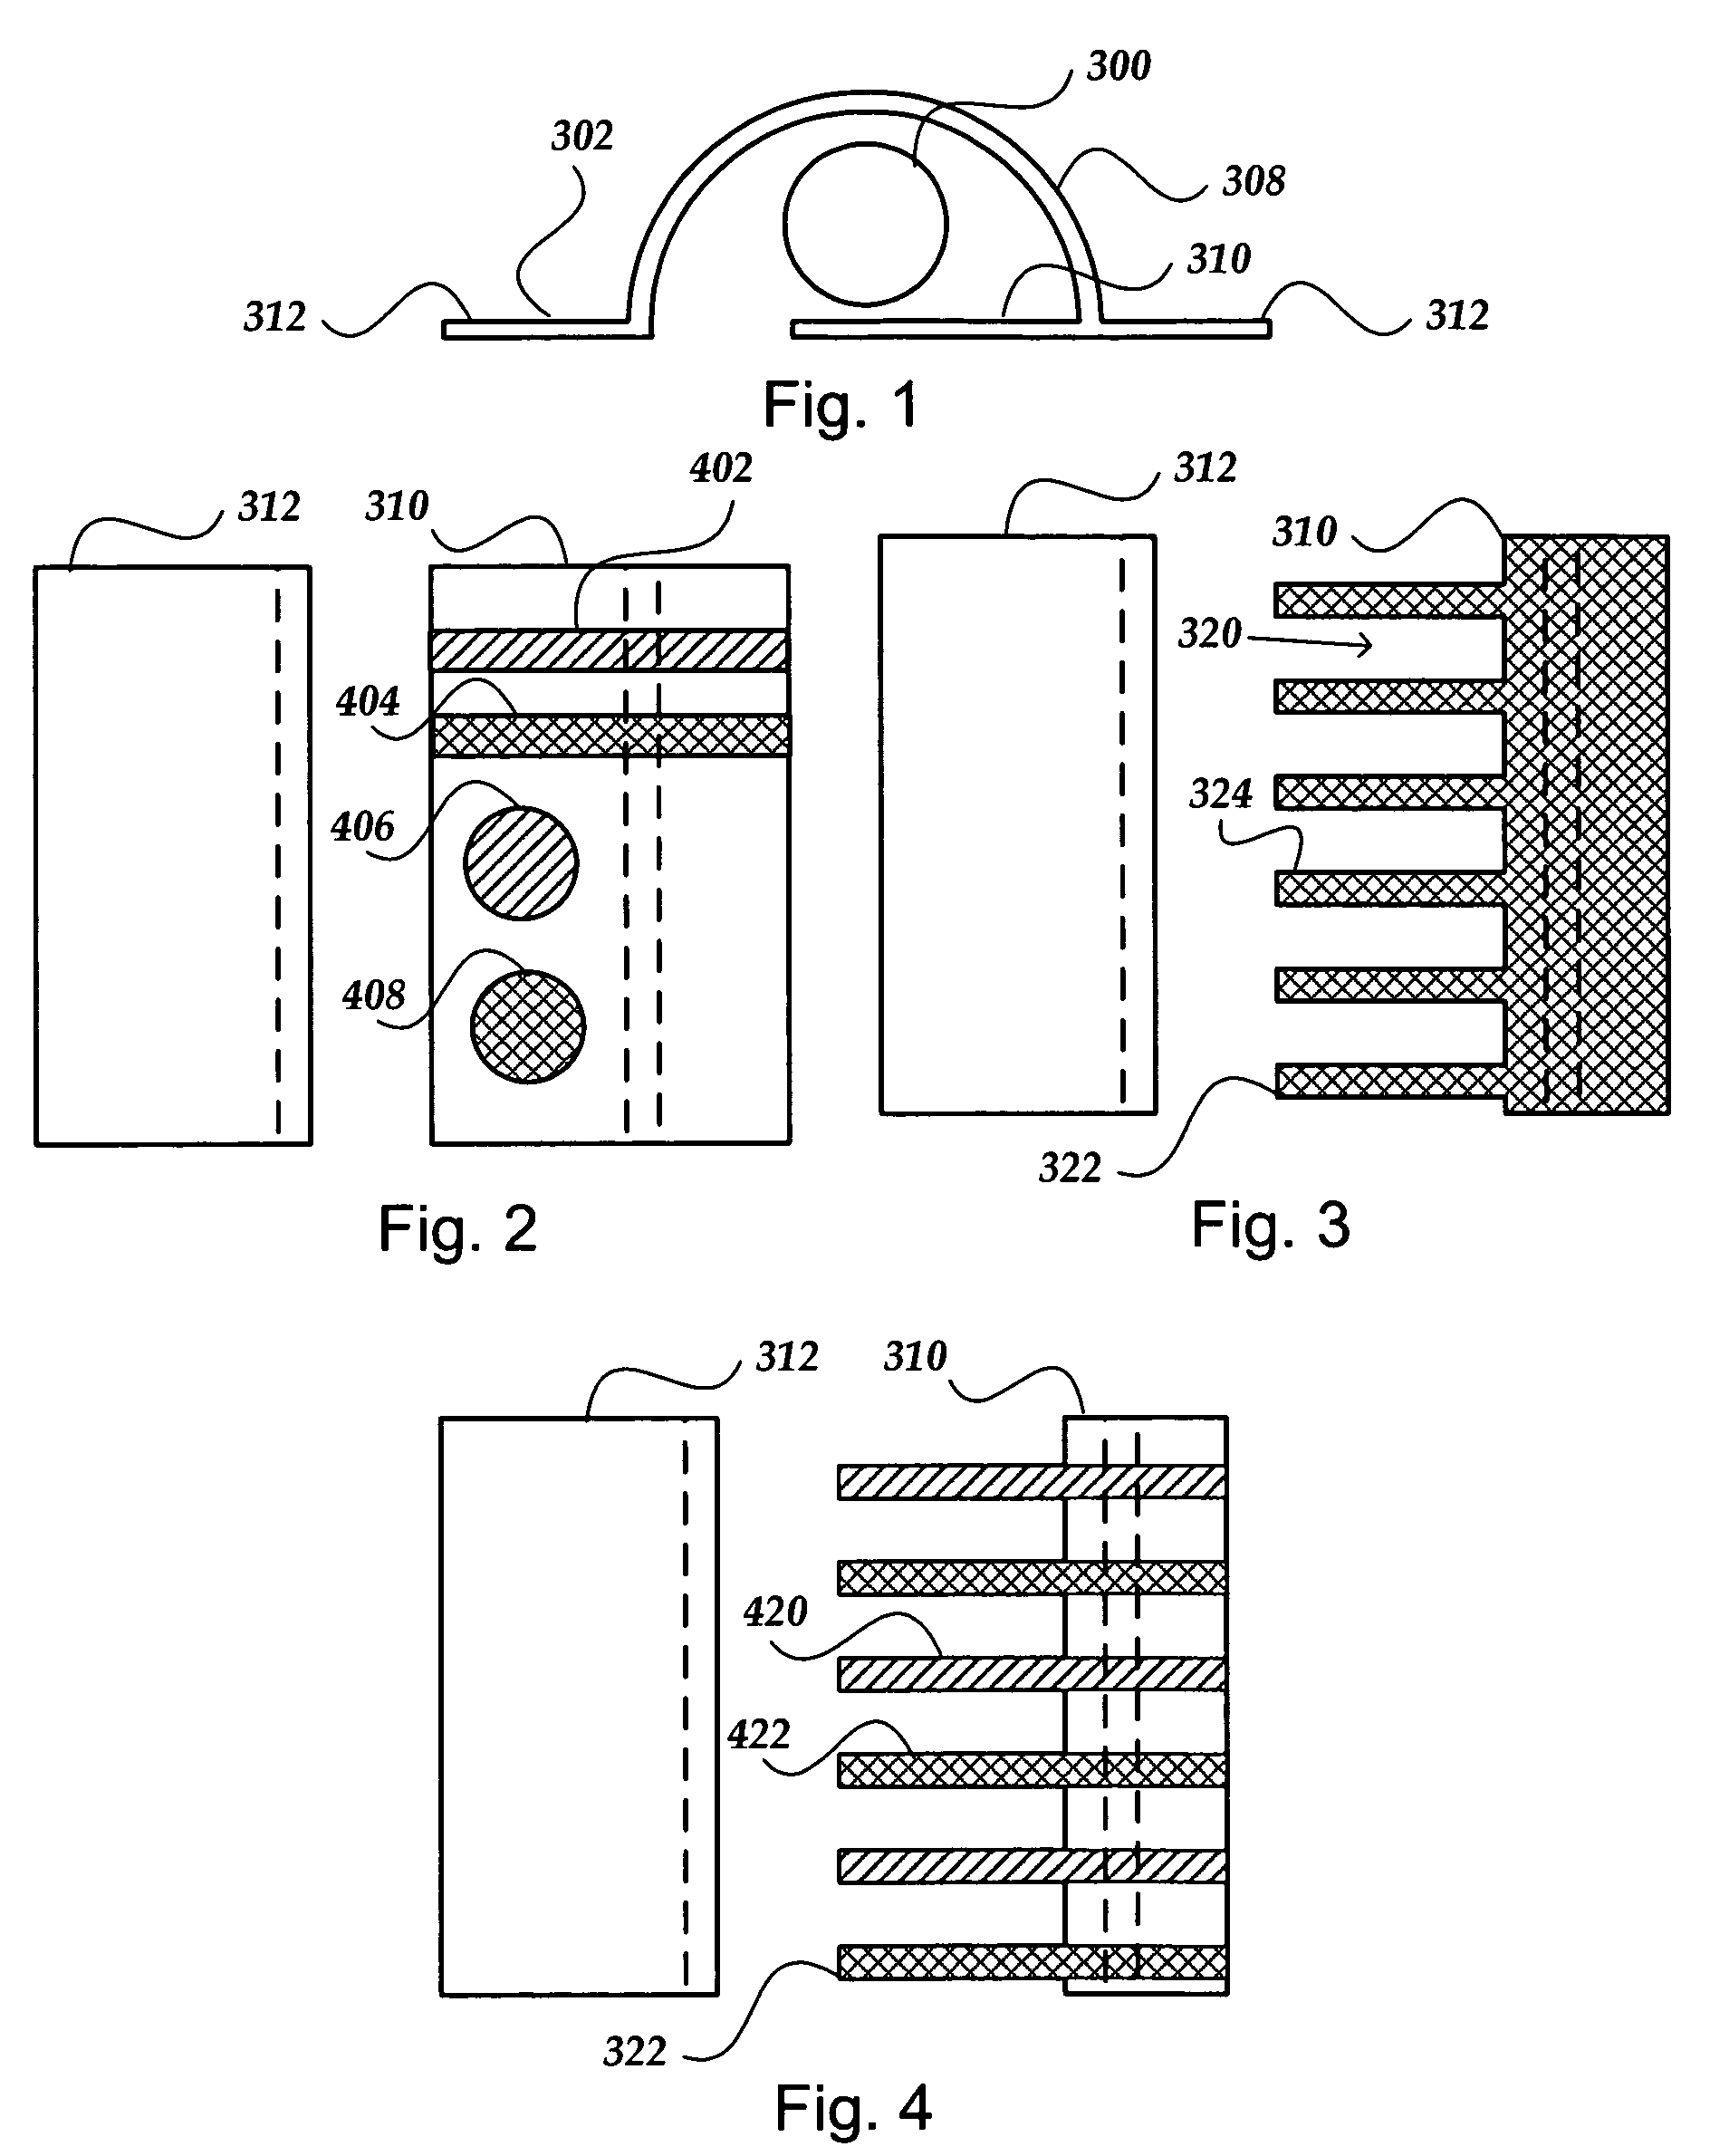 Cuff electrode arrangement for nerve stimulation and methods of treating disorders